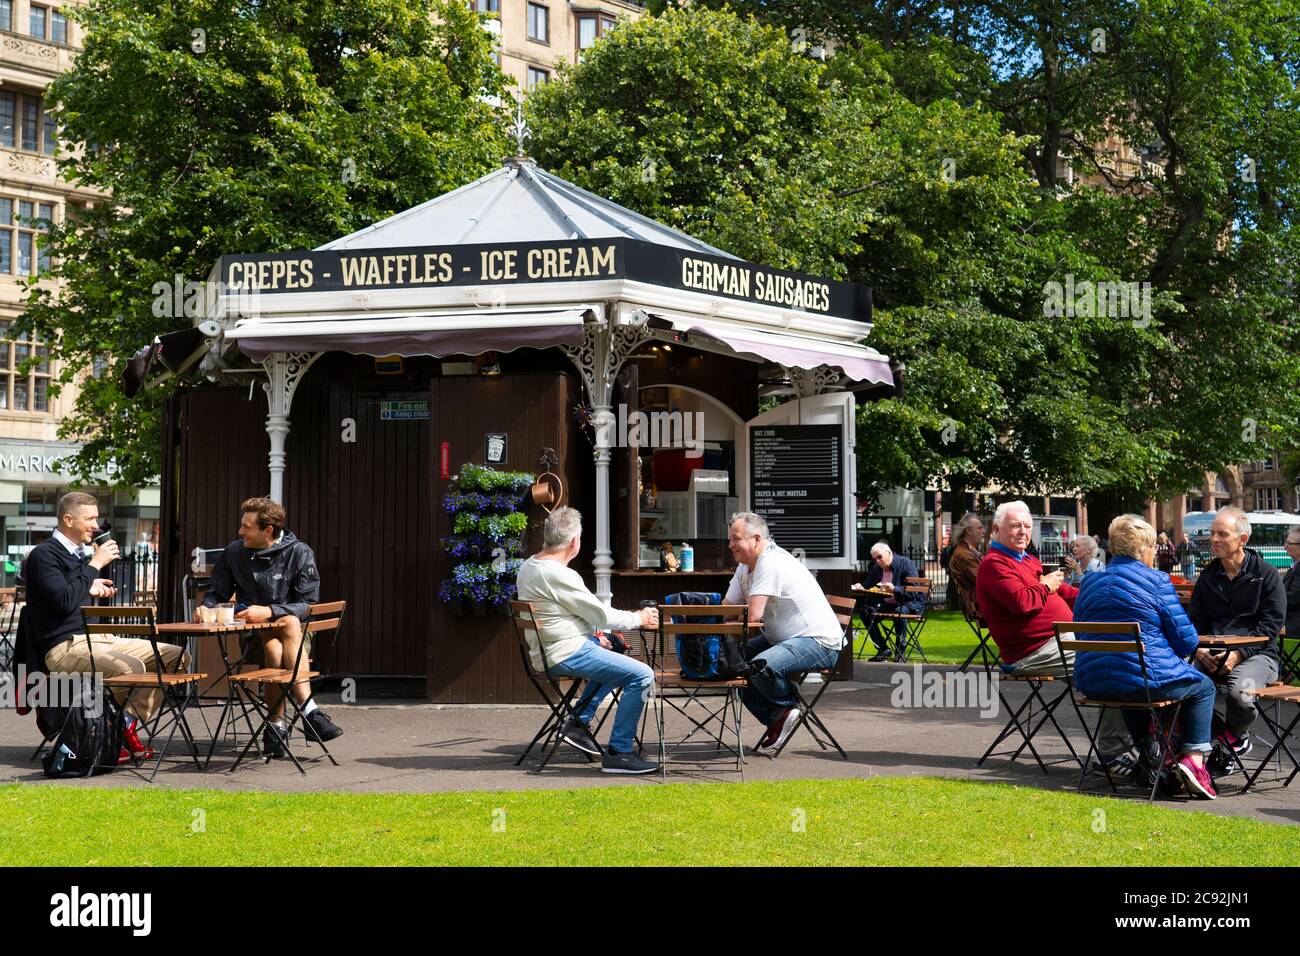 Edinburgh, Scotland, UK. 28 July, 2020. Business and tourism slowly returning to the shops and streets of Edinburgh city centre. The public returning to enjoy cafe inside East Princes Street Gardens which have recently reopened after landscaping and drainage improvement works. Iain Masterton/Alamy Live News Stock Photo